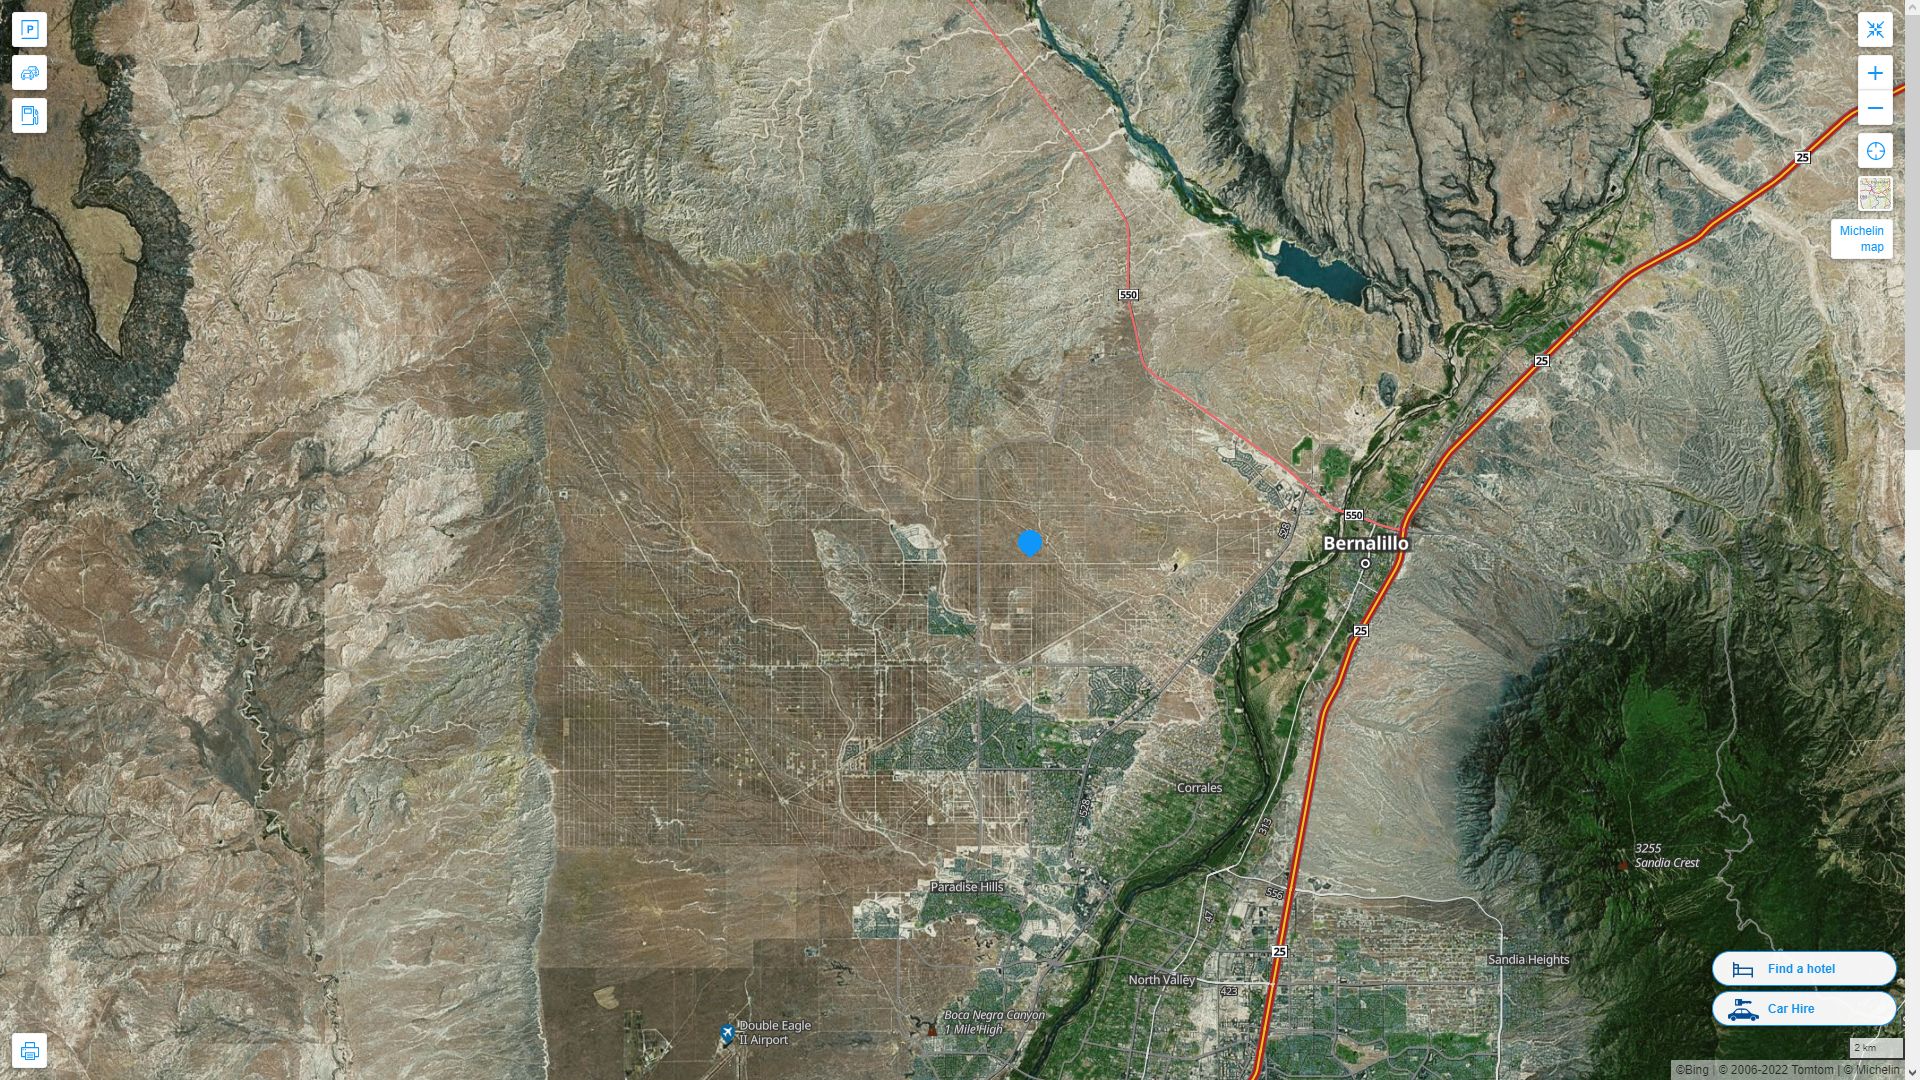 Rio Rancho New Mexico Highway and Road Map with Satellite View